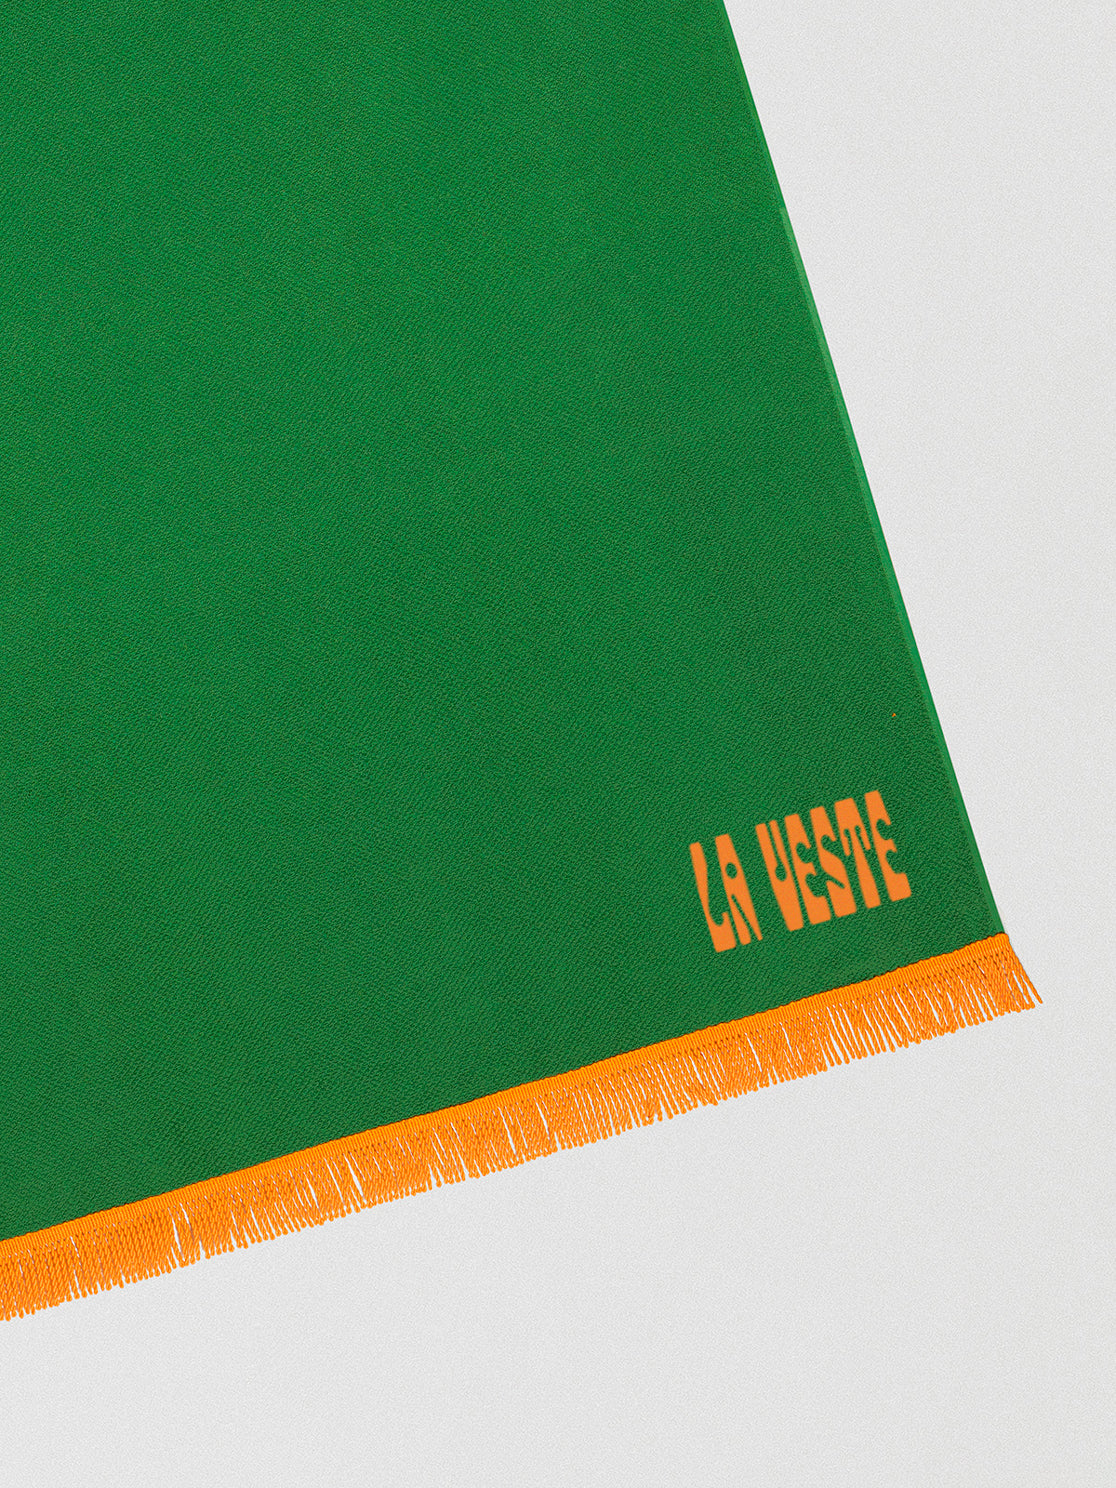 Towel made in green cotton with orange fringes detail. 